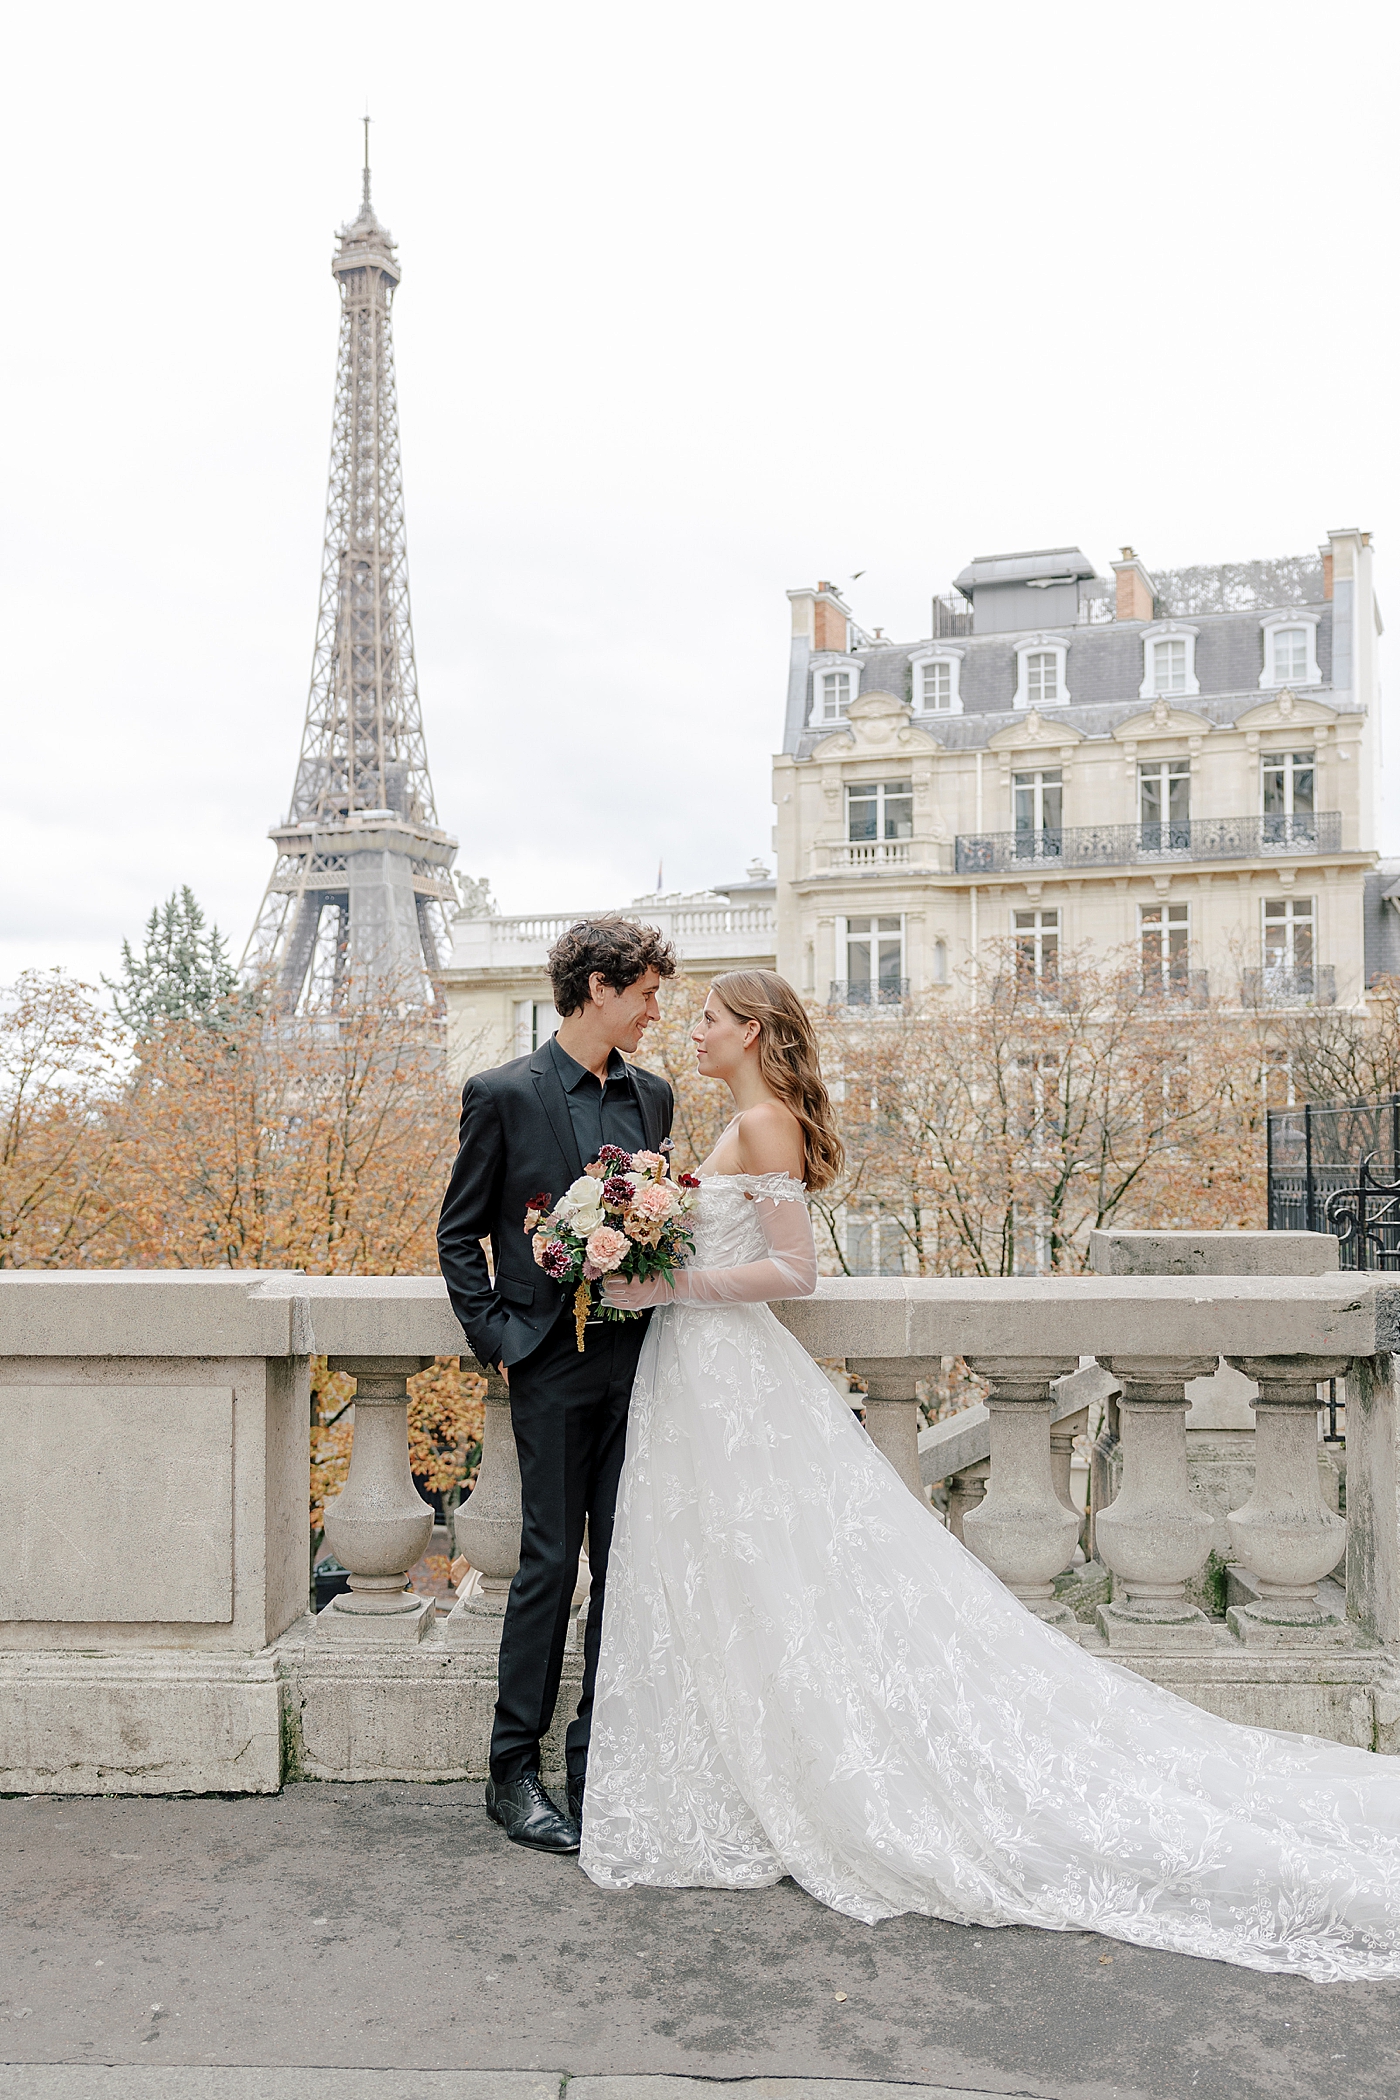 Bride and groom embracing with the Eiffel Tower in background | Image by Hope Helmuth Photography